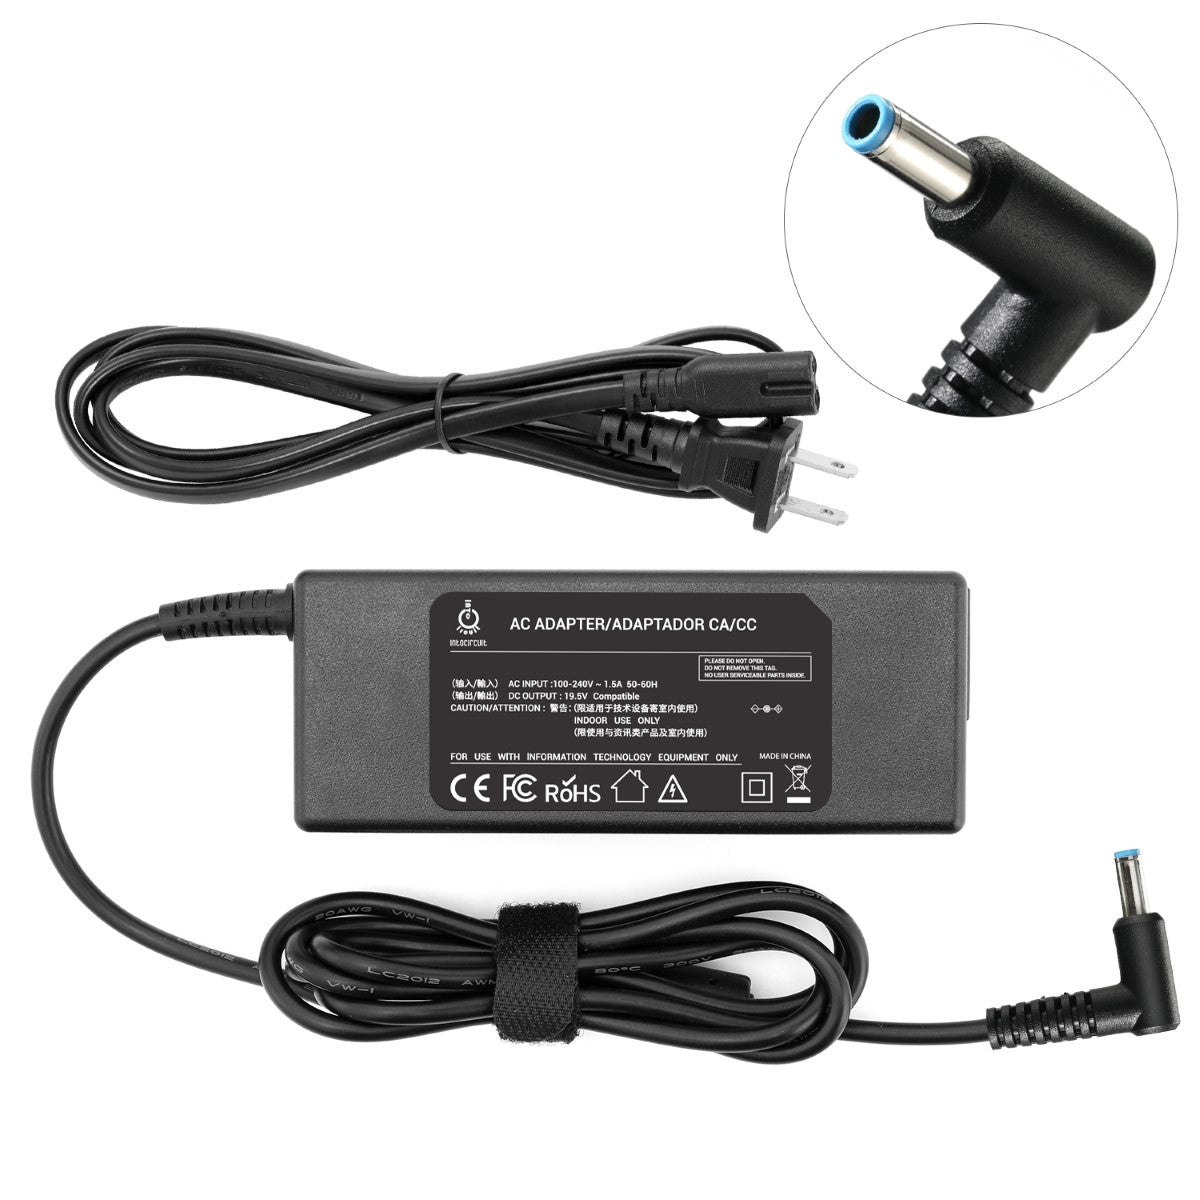 Charger for HP 340 G1 F7V07UT Notebook